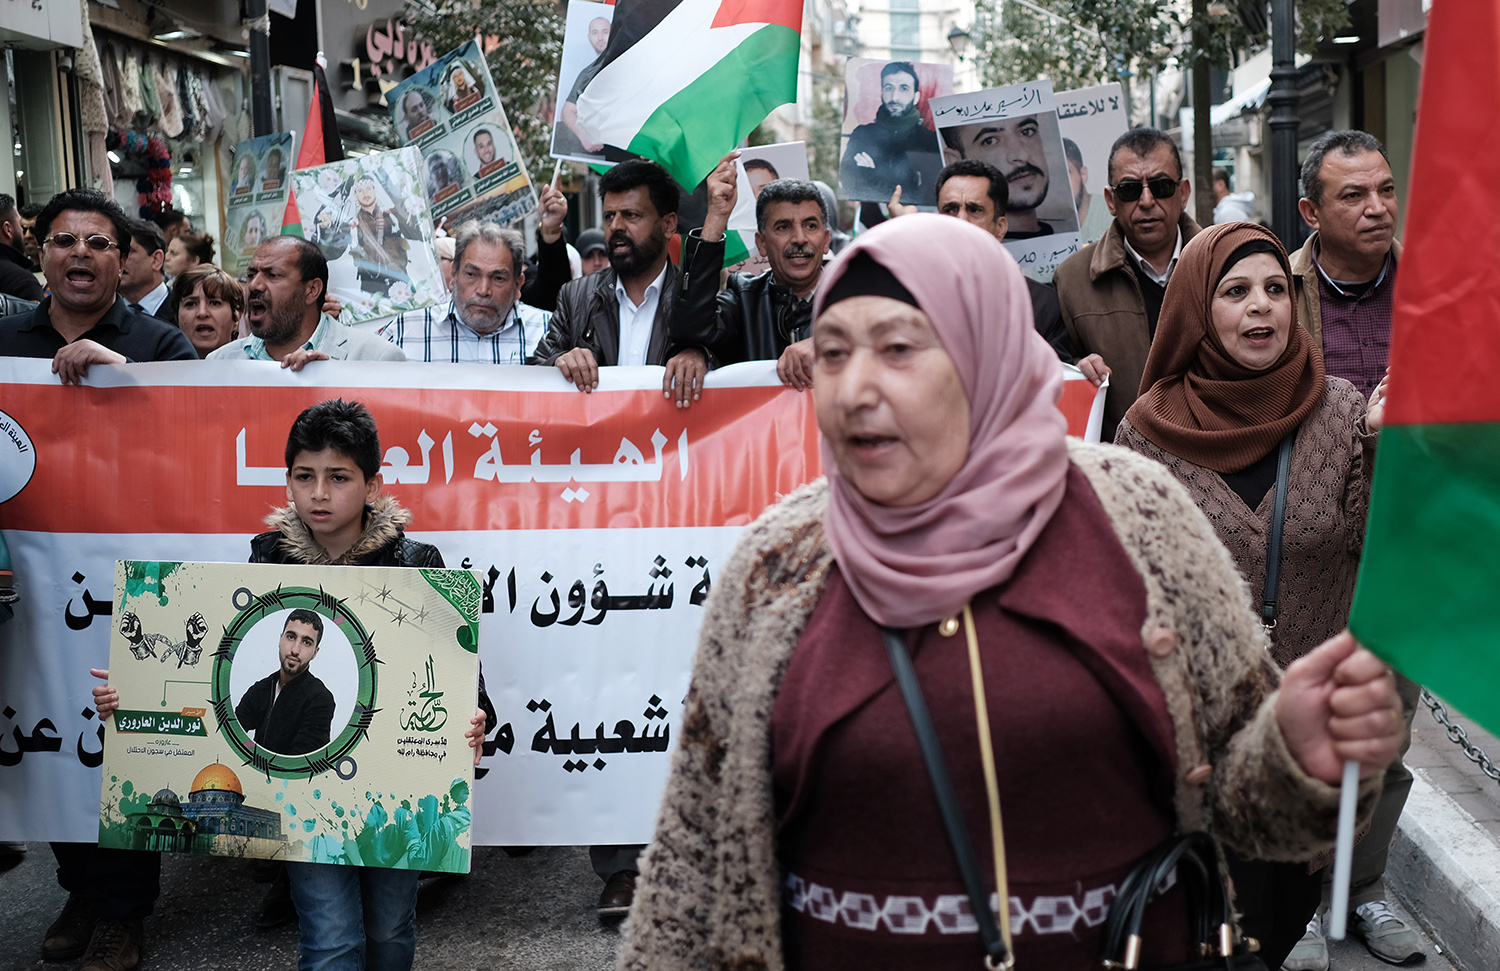  A peaceful demonstration drawing attention to imprisoned Palestinians, Ramallah, West Bank. 